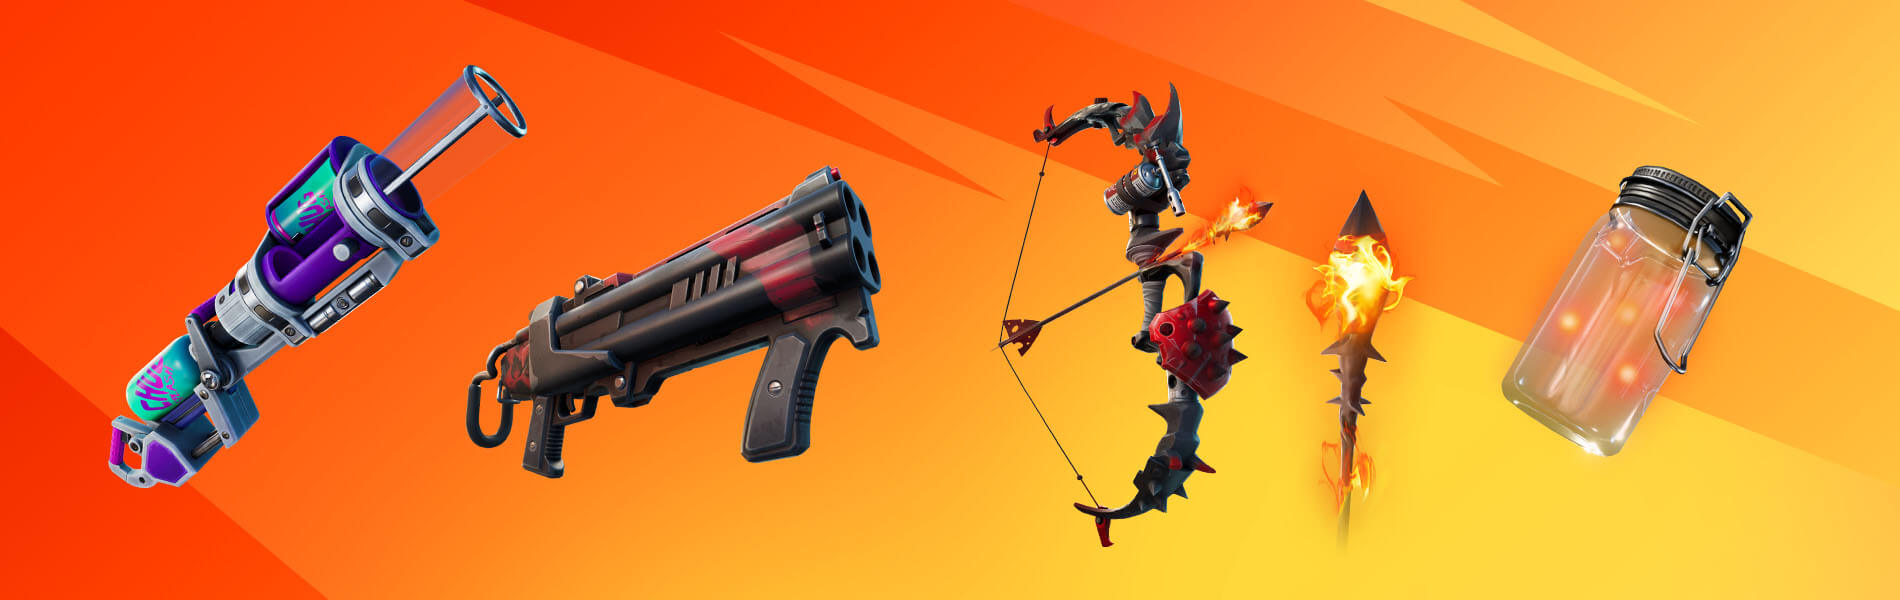 Patch Notes for Fortnite v21.51 - Fire with Fire Week